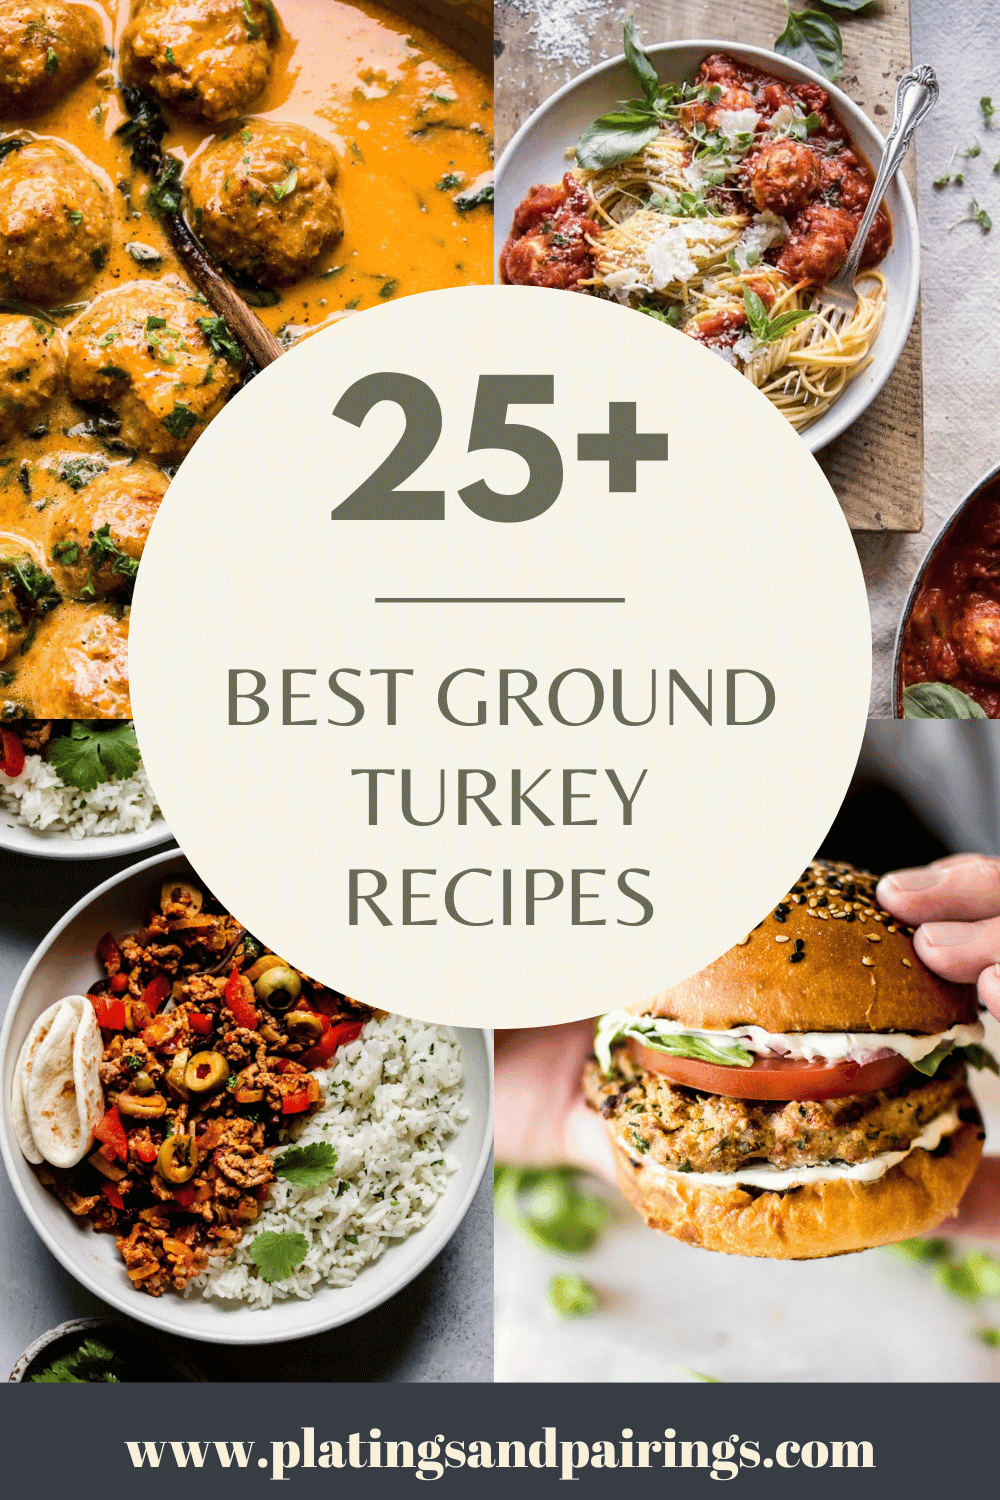 Collage of ground turkey recipes with text overlay - best ground turkey recipes.